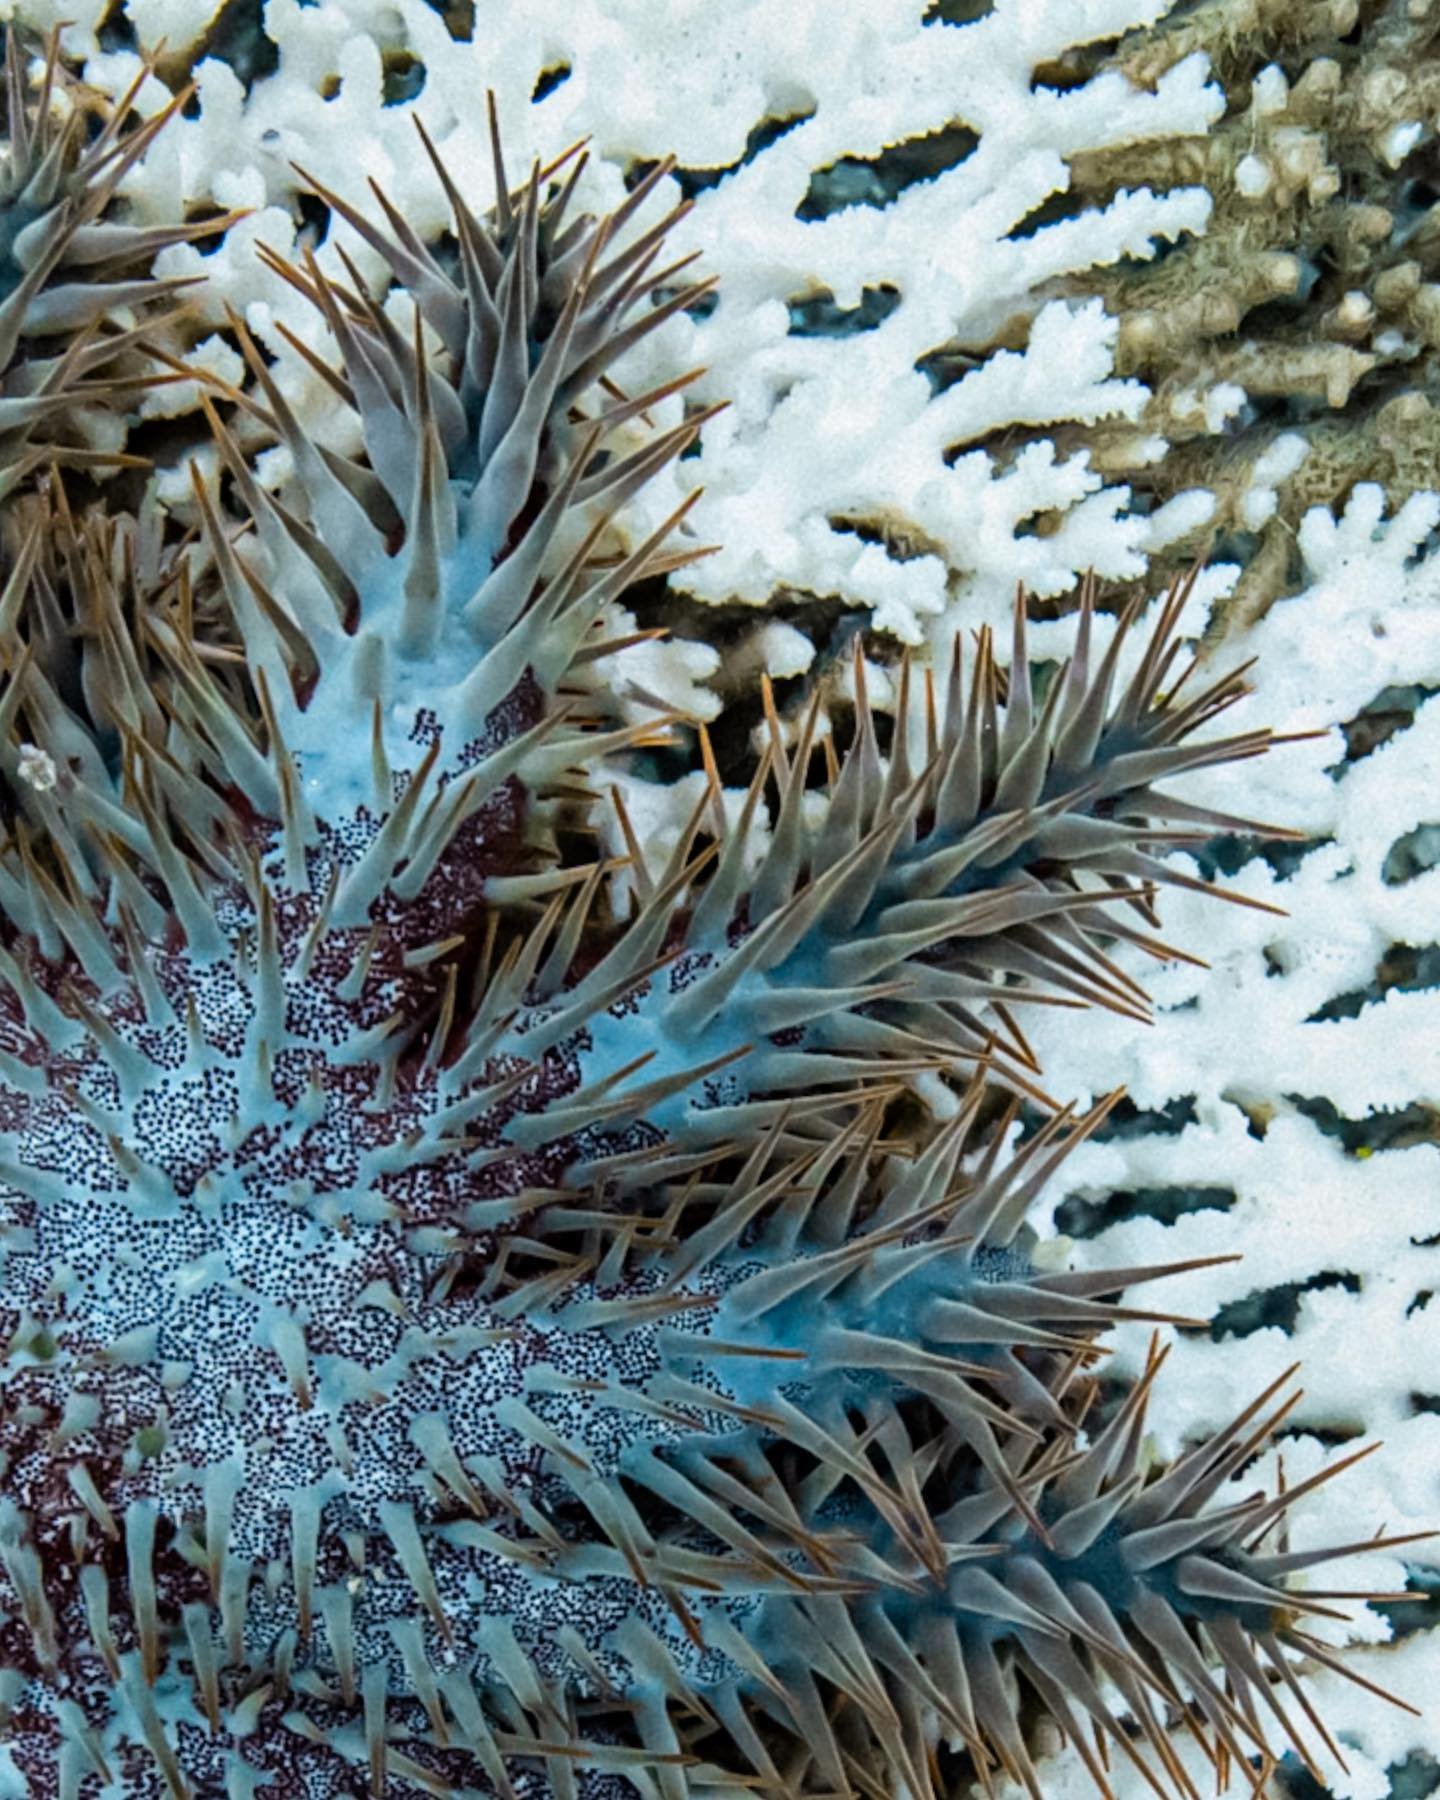 Coral Killers ⭐️ 

I had never come across the Crown of Thorns starfish before researching my trip to the Togean Islands in Indonesia last year. Before I arrive at a new place, I will always scope out some local ocean initiatives in the hope of givin